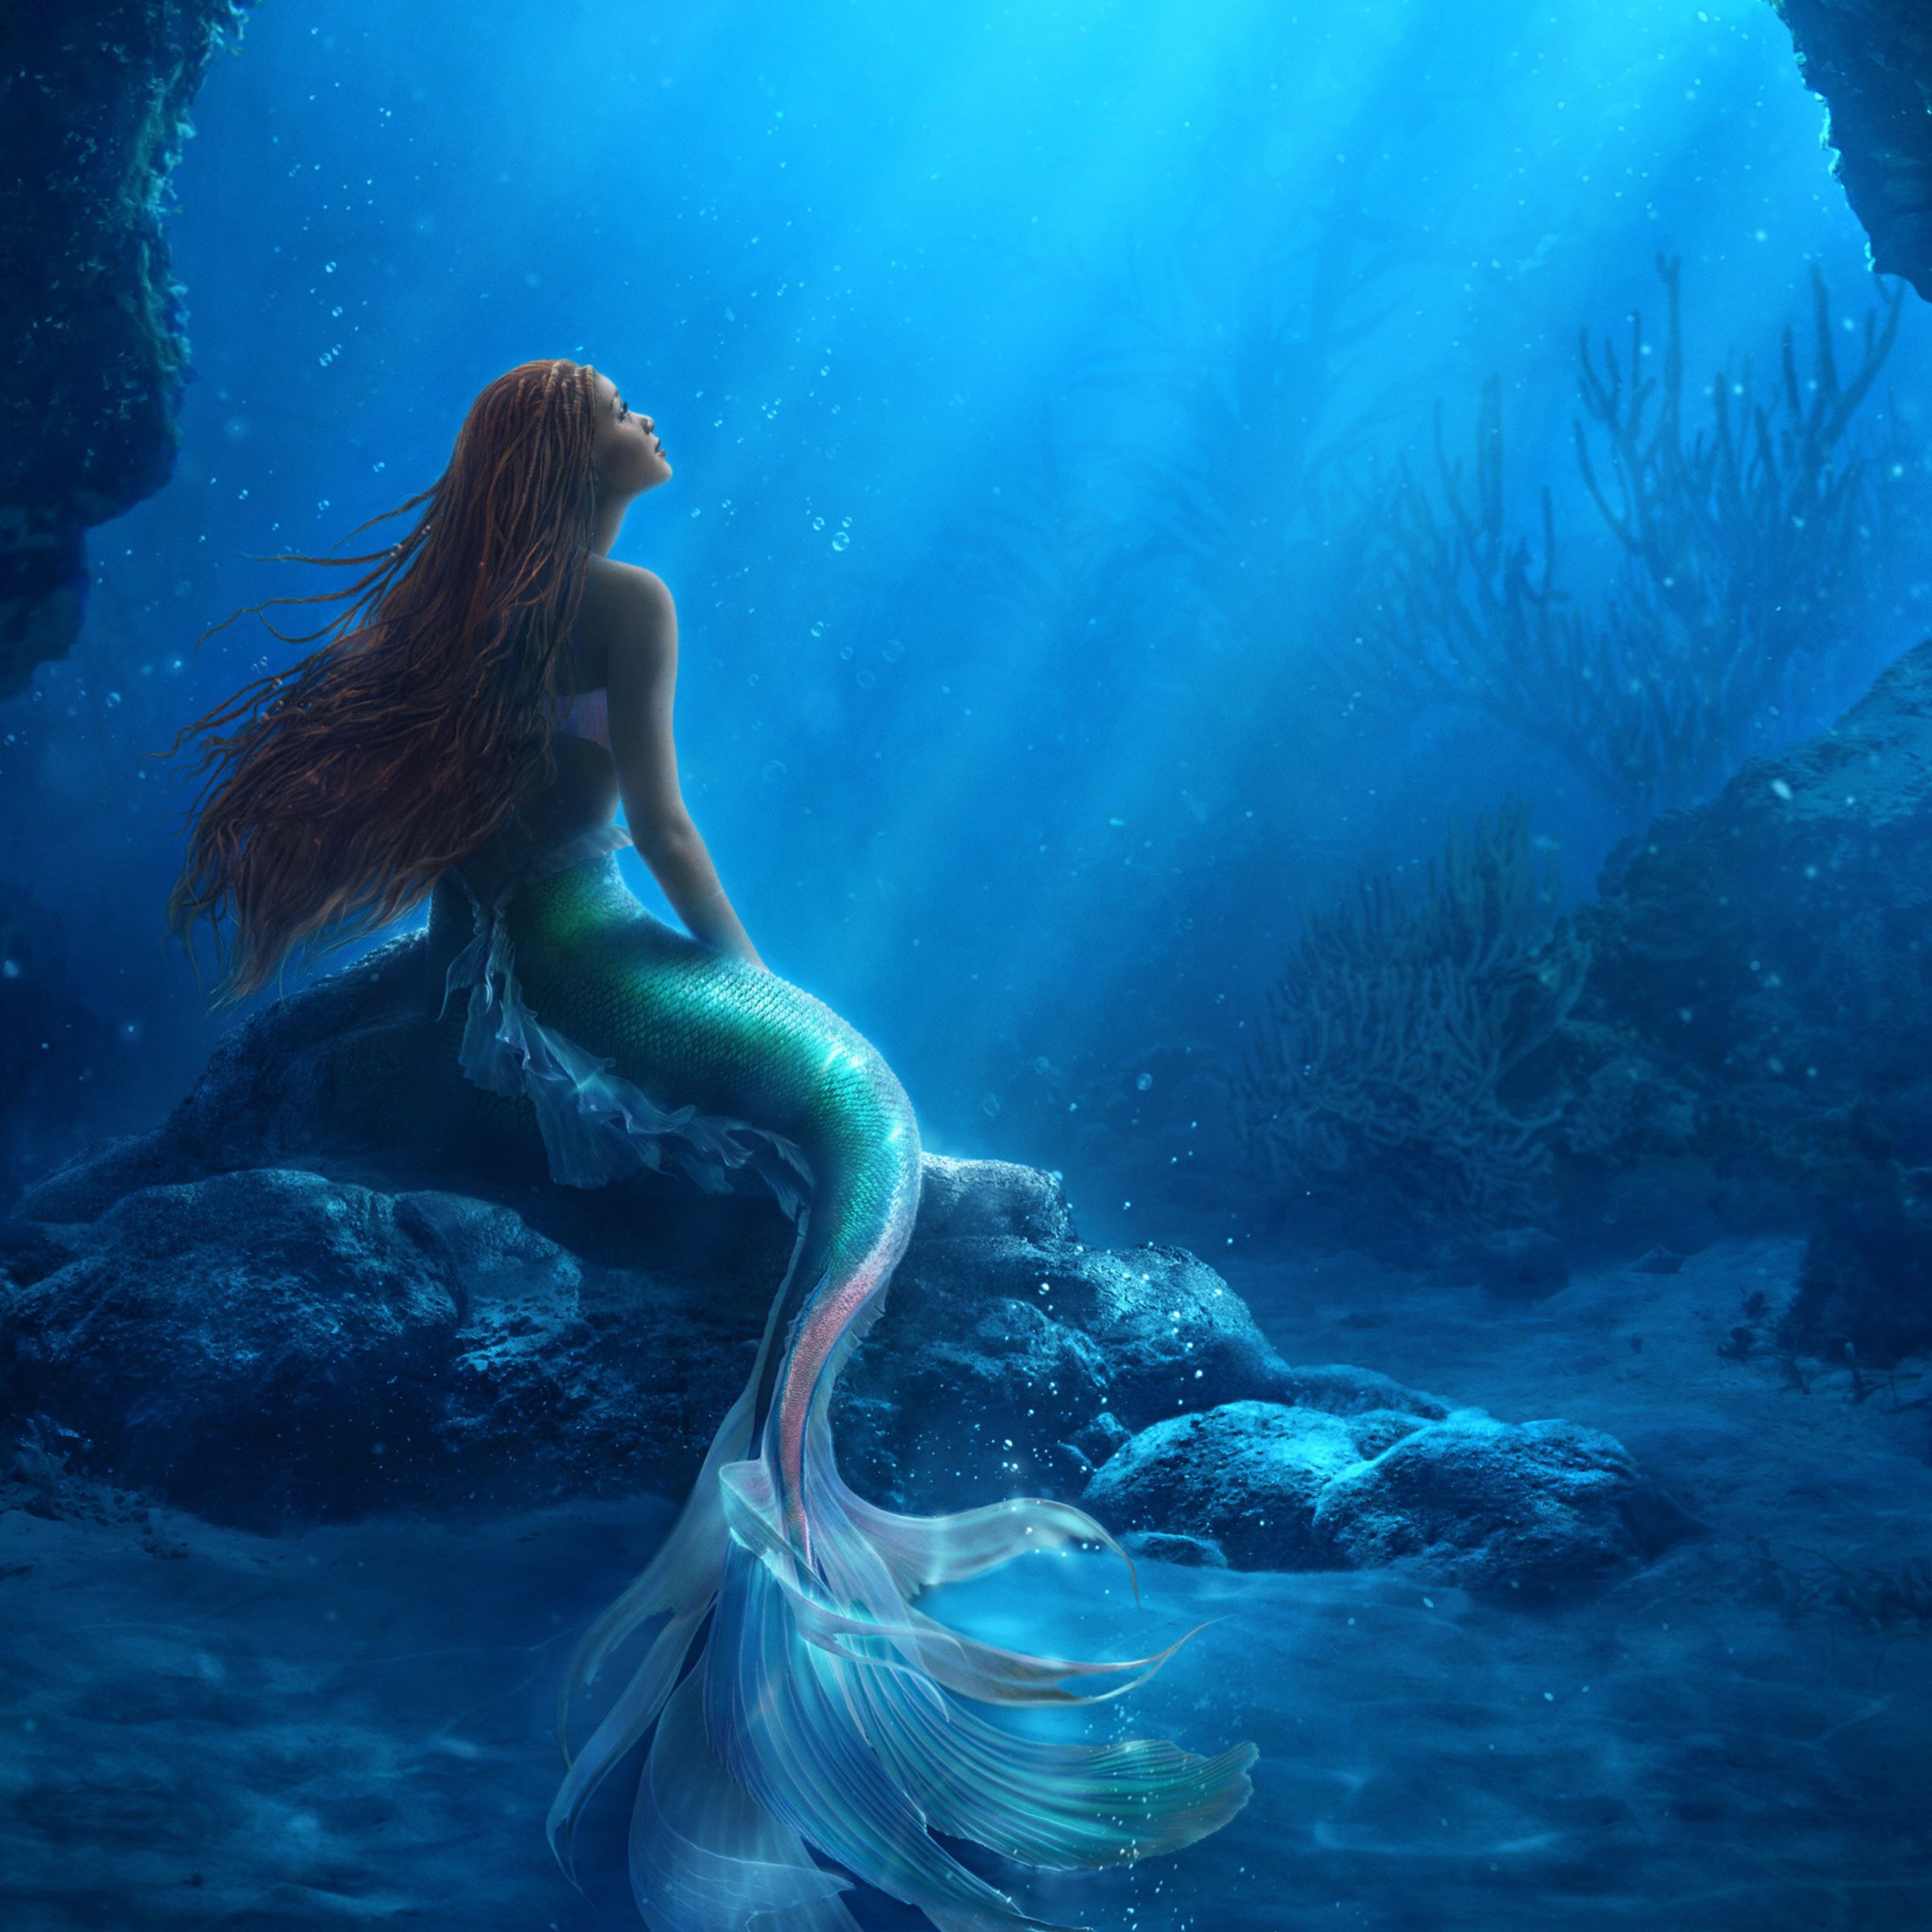 25 Actors You Want to See in Disney's Live-Action Little Mermaid